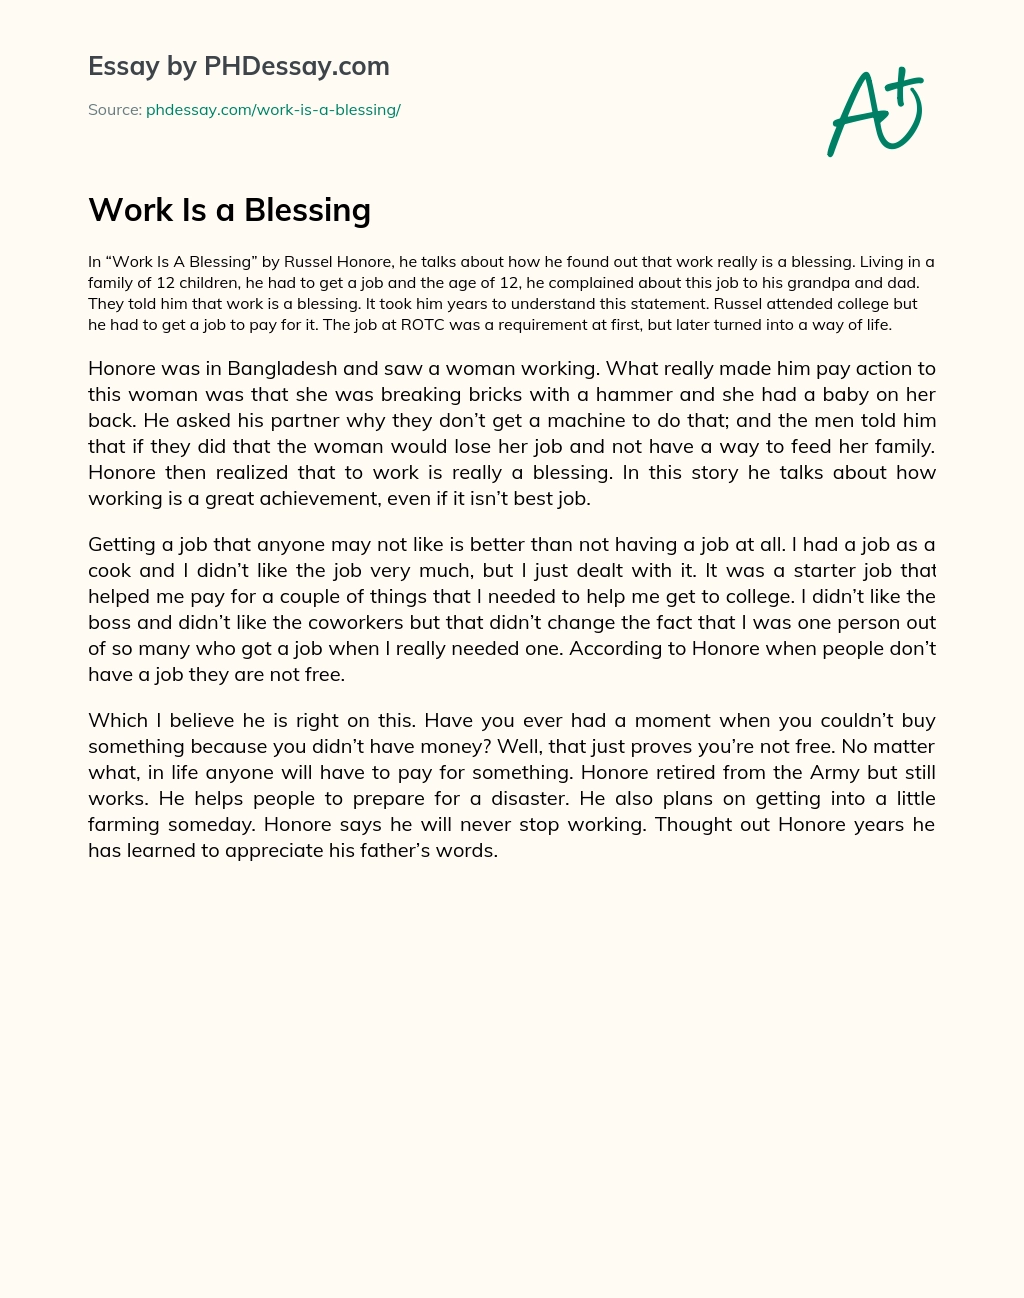 Work Is a Blessing essay